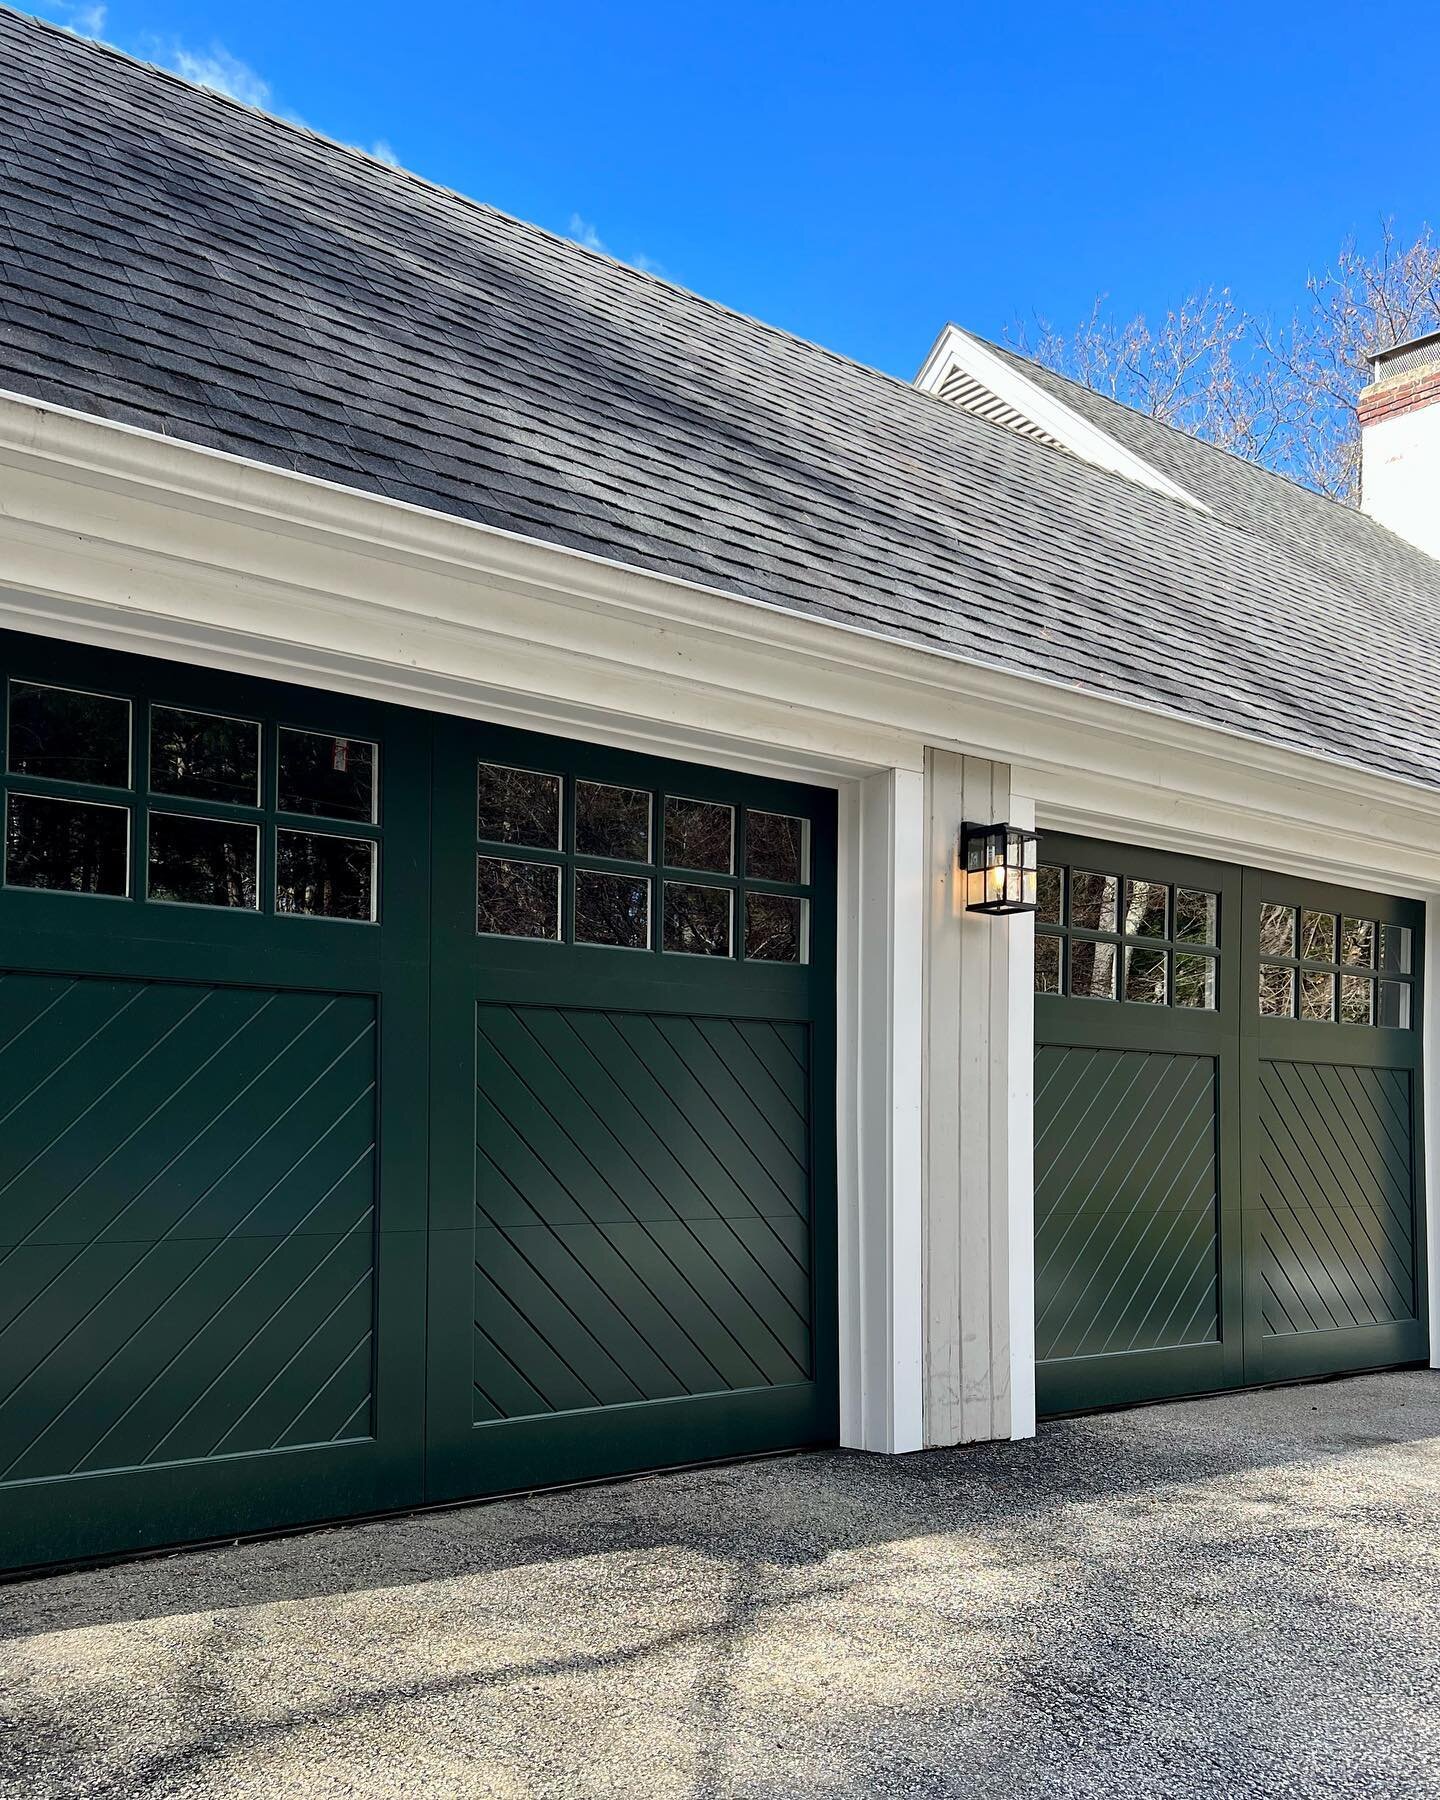 Coming down the driveway, the first and only thing you see are these garage doors&hellip; (swipe right to see the before photo.) ⁣
⁣
This homeowner had a vision and we were able to execute.  On a lot of homes, garage doors are the first thing you see